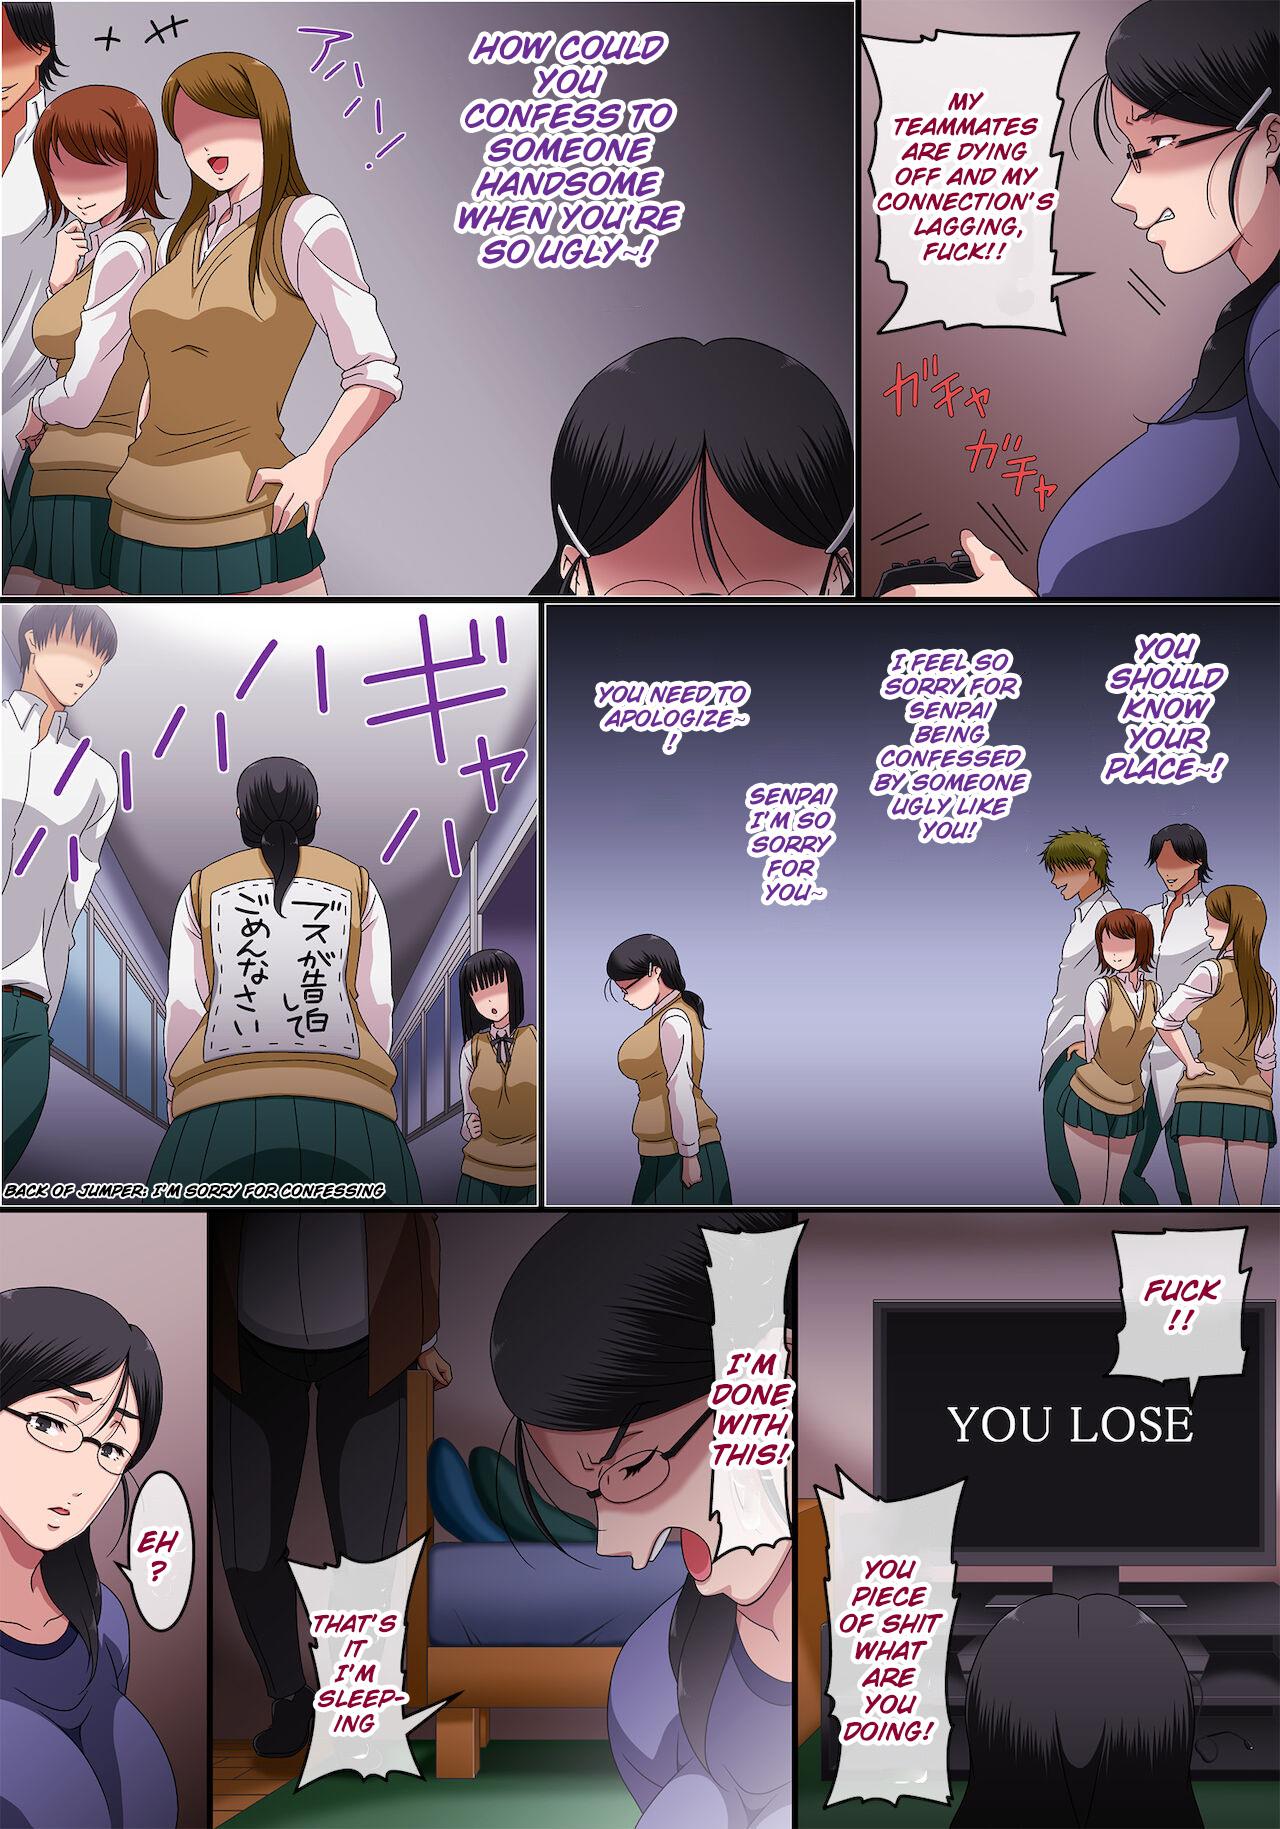 Tiny Something unbelievable happened when I stopped time for 1 month and violated a 42 year old hikikomori woman - Original Lesbian Sex - Page 5